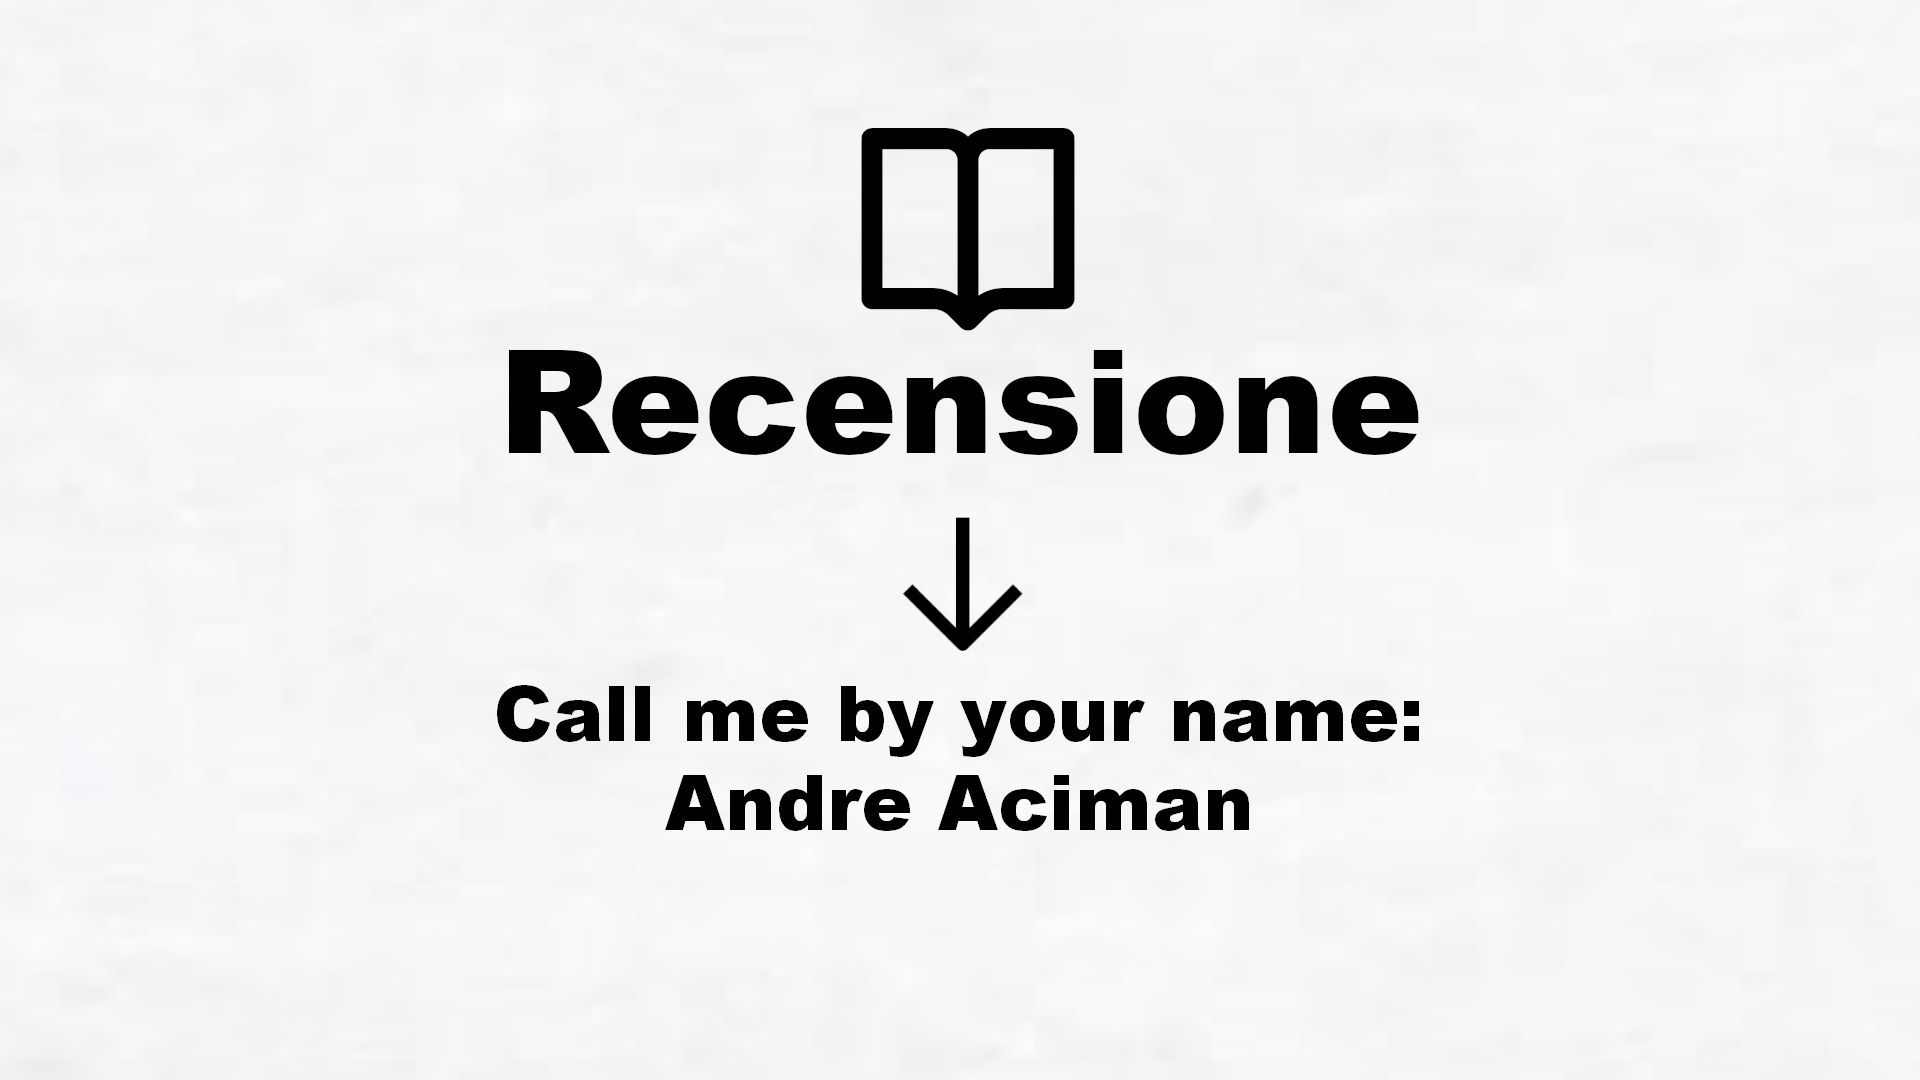 Call me by your name: Andre Aciman – Recensione Libro